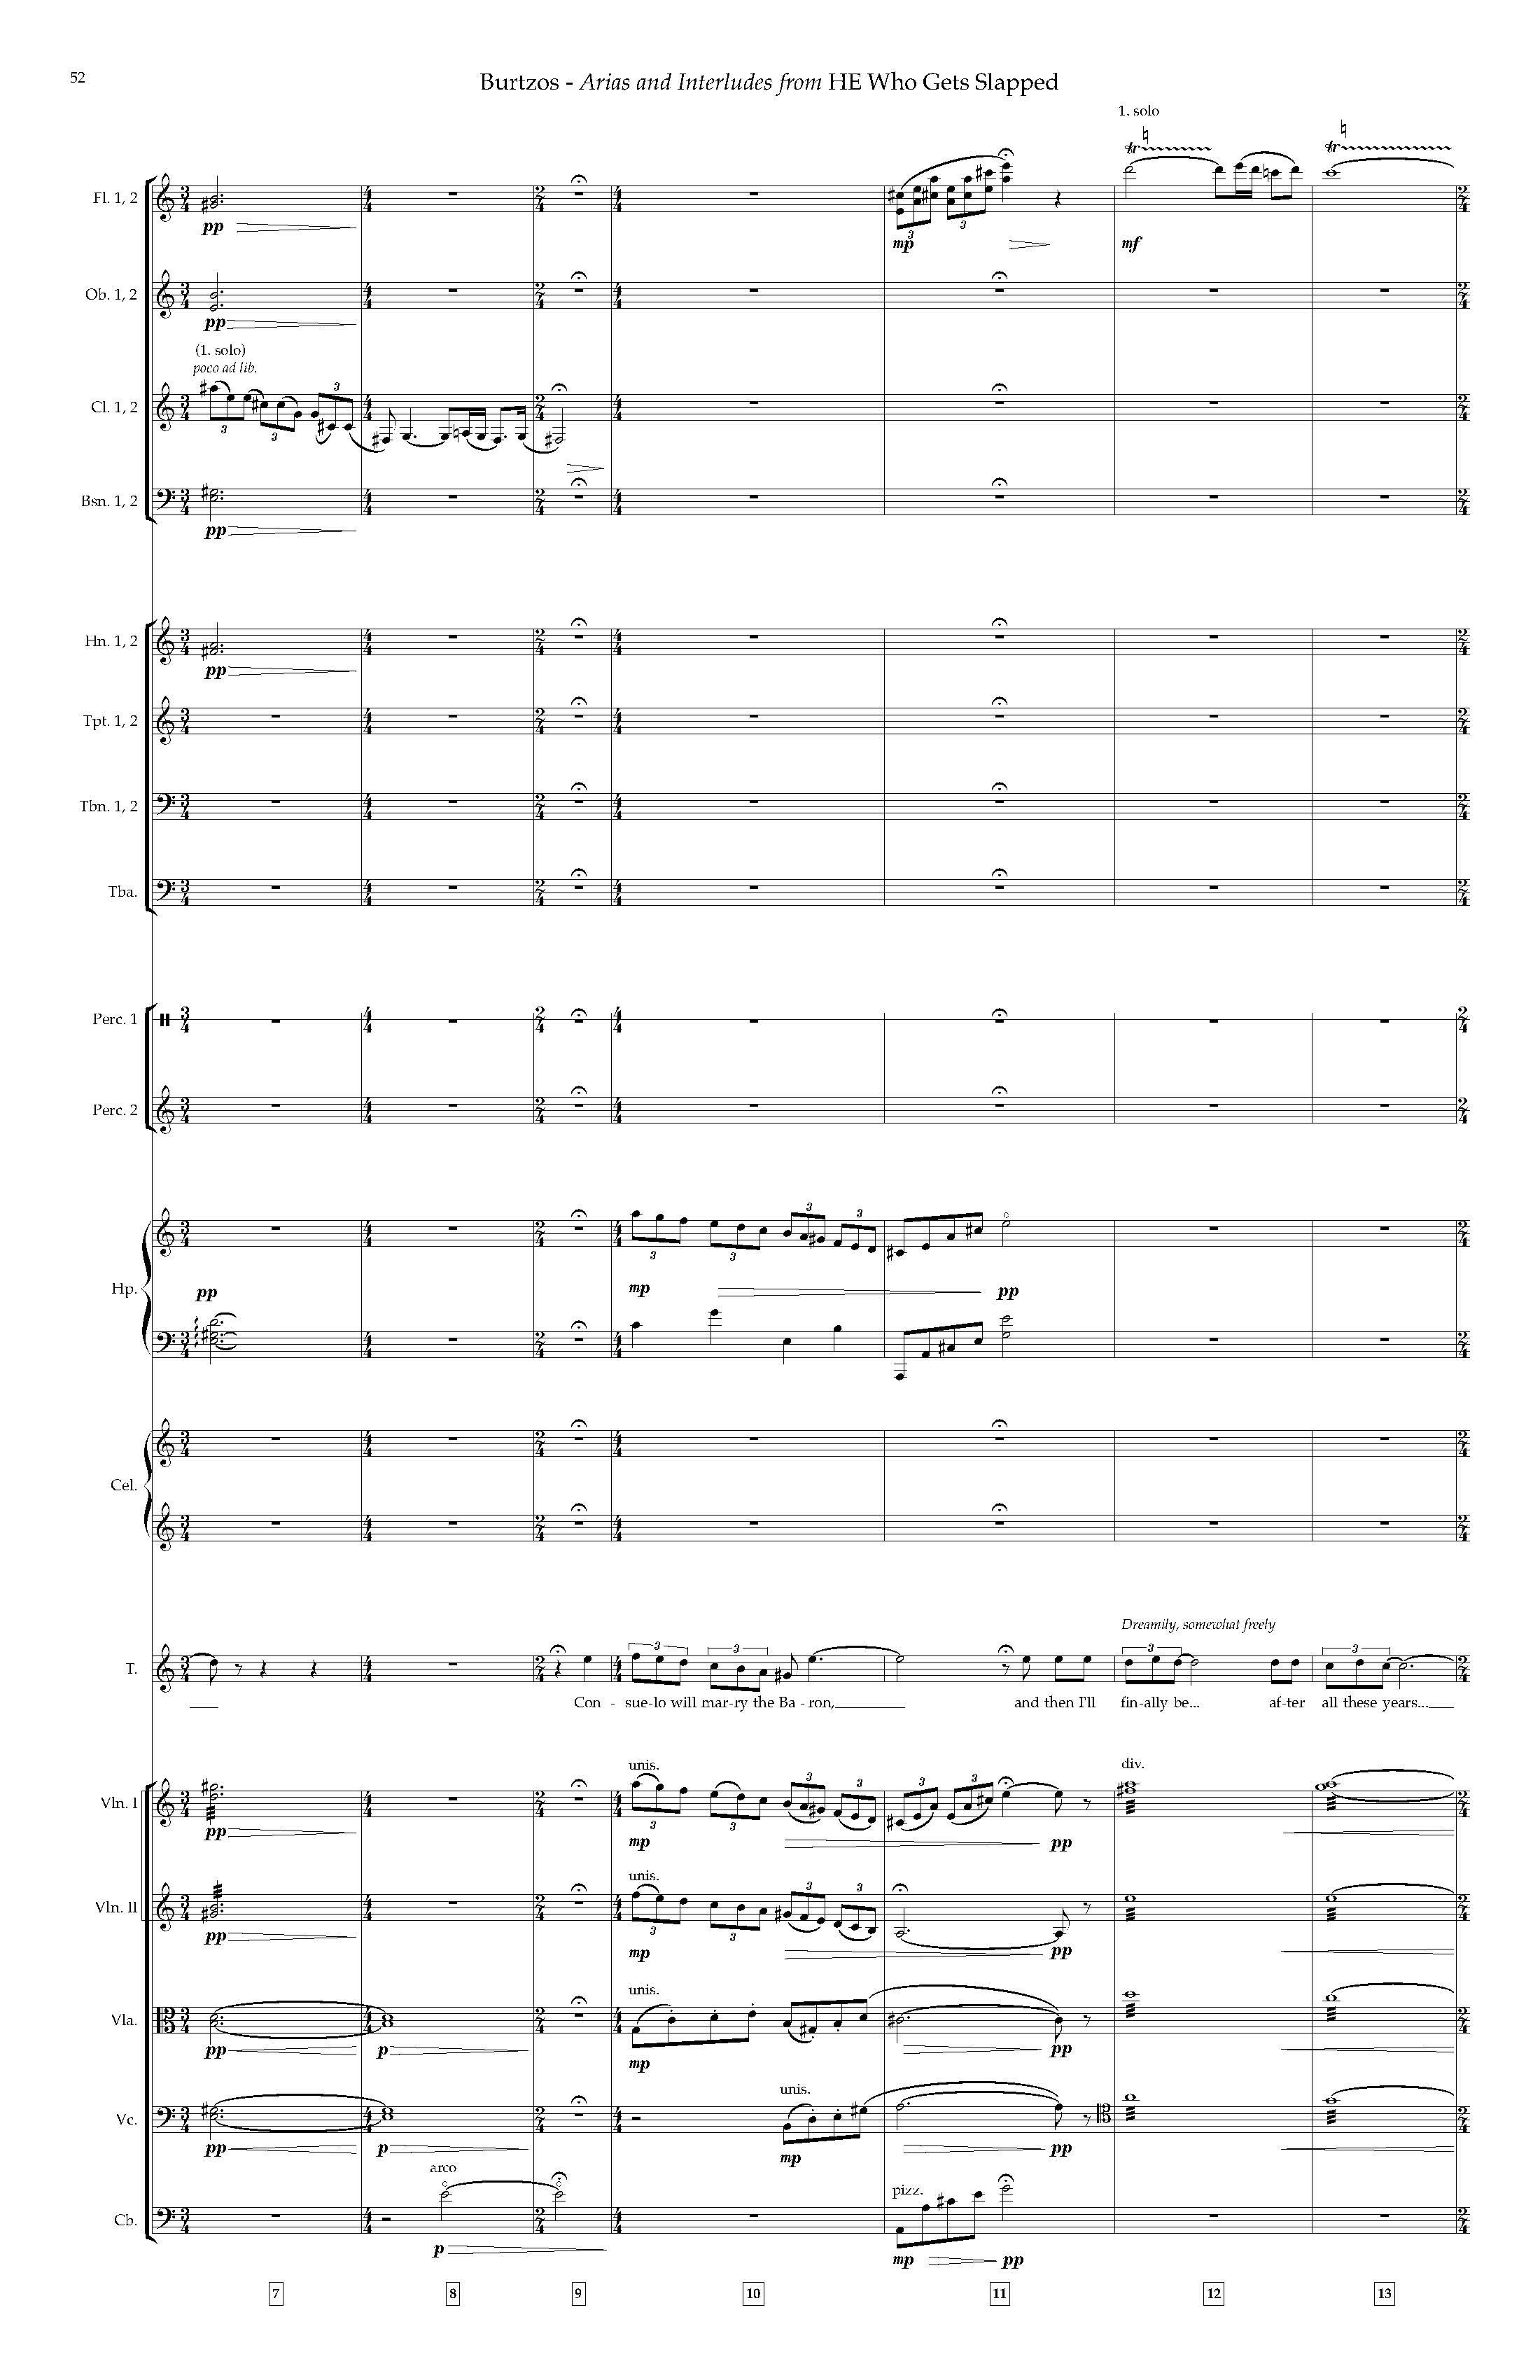 Arias and Interludes from HWGS - Complete Score_Page_58.jpg